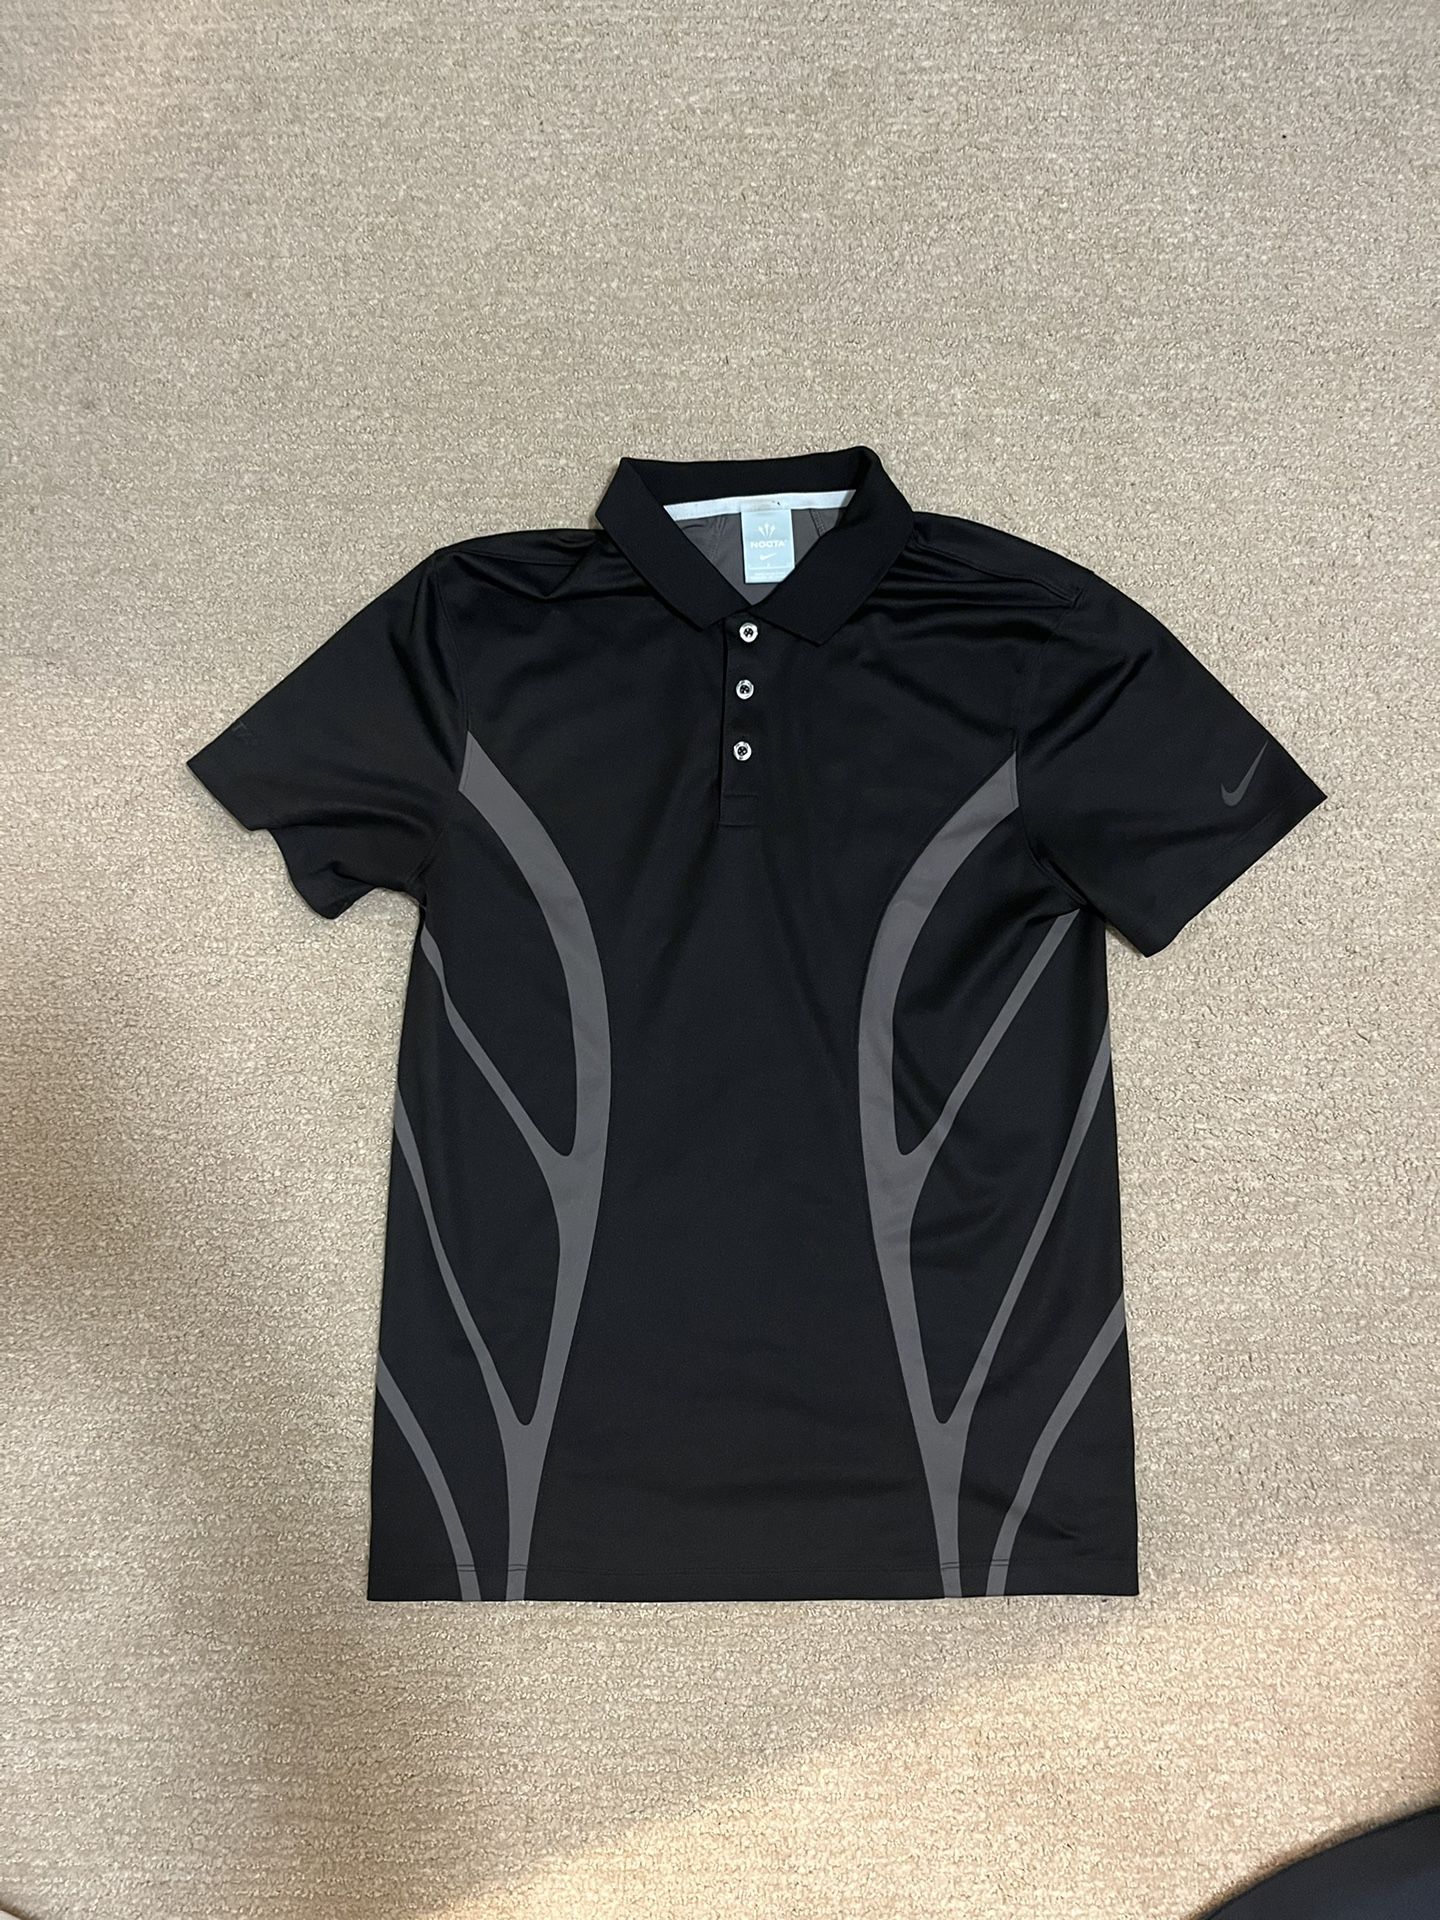 Nike X Nocta Polo for Sale in Irvine, CA - OfferUp